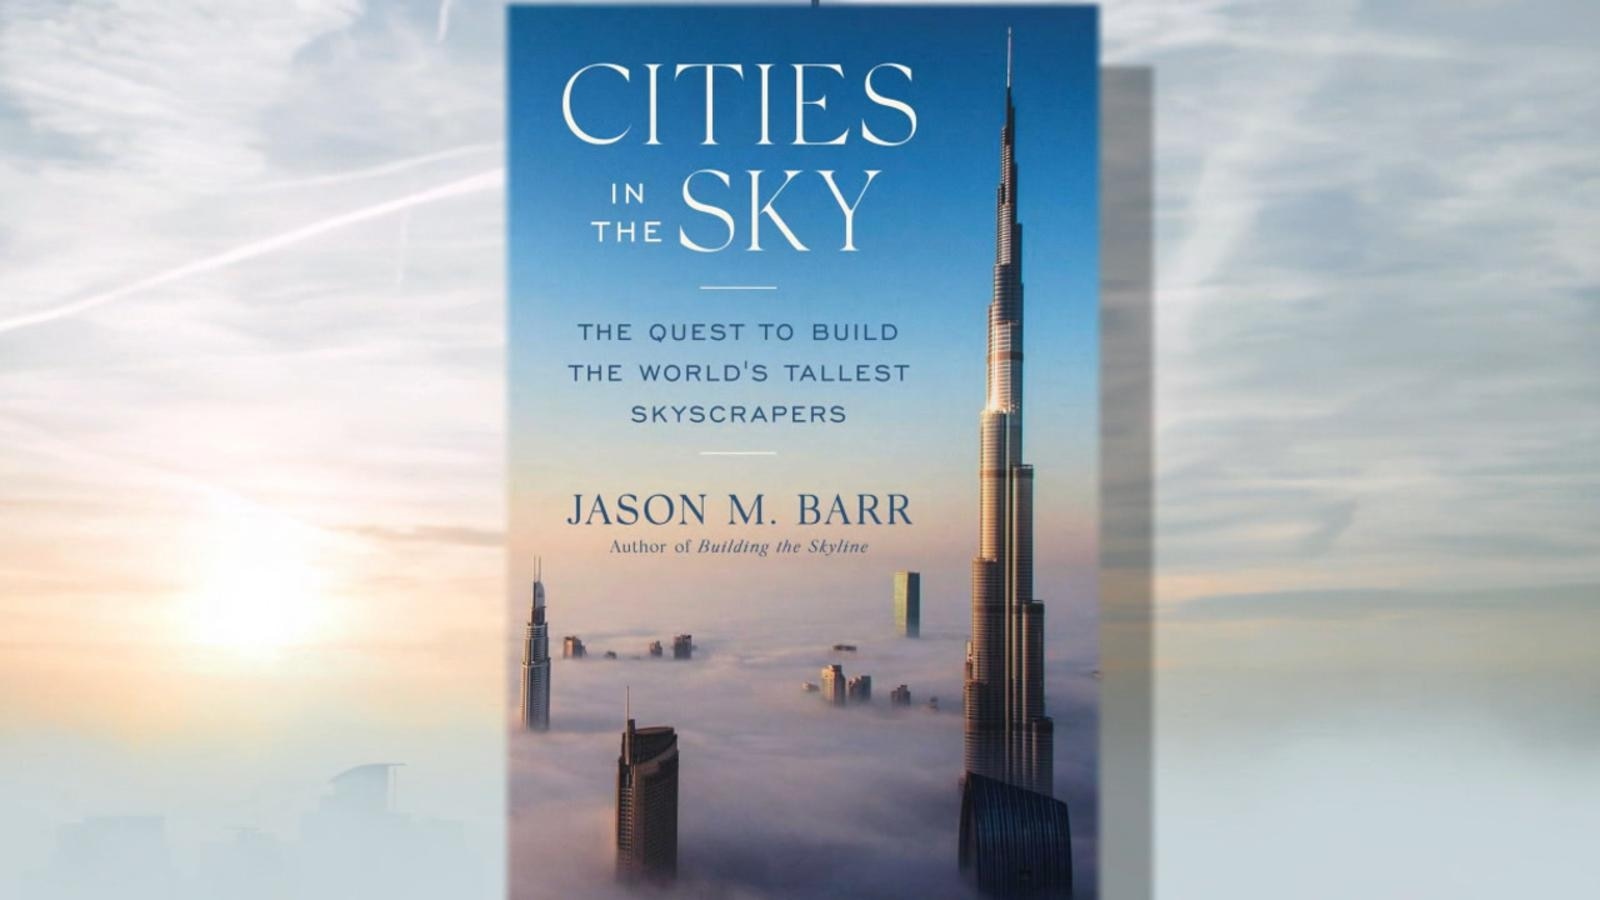 Global quest for taller and taller buildings driven by urban future, author says [Video]